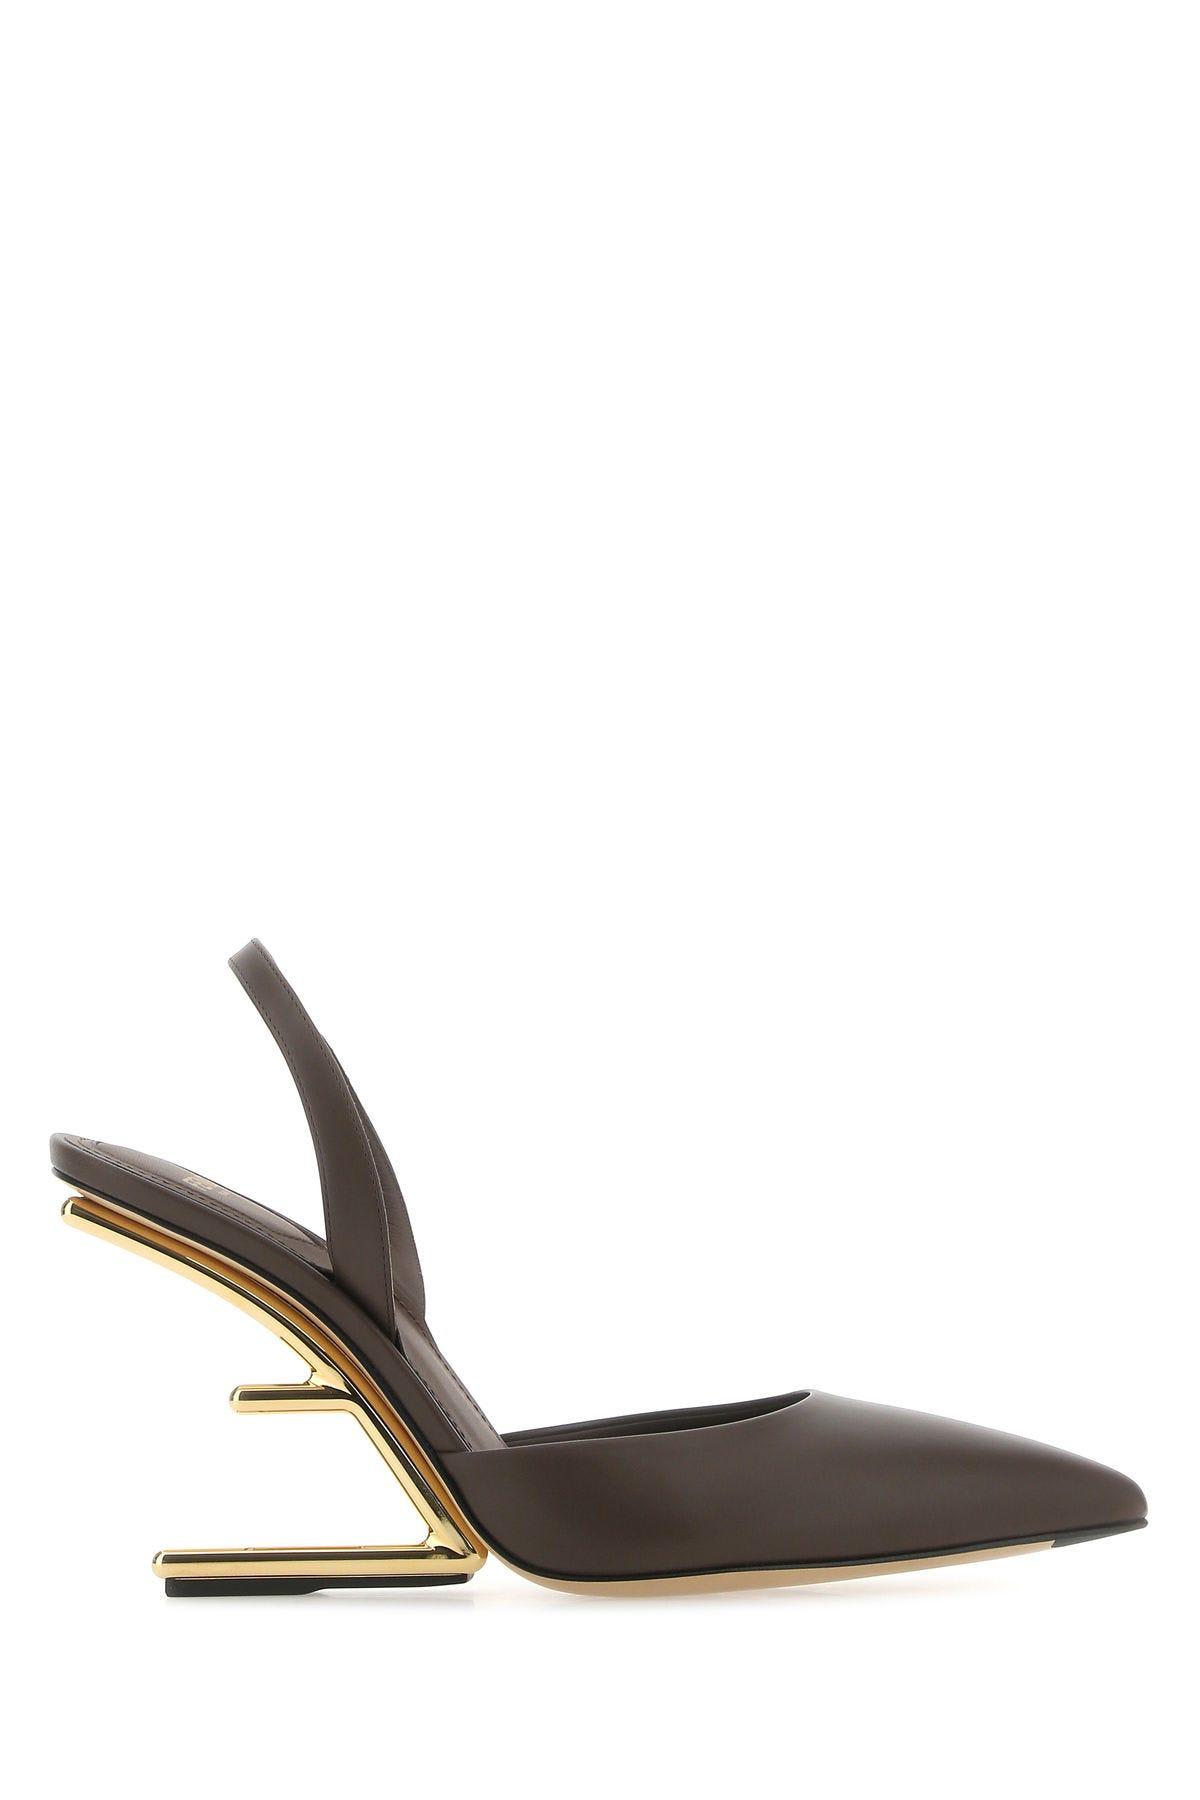 Shop Fendi Chocolate Leather First Pumps In Brown